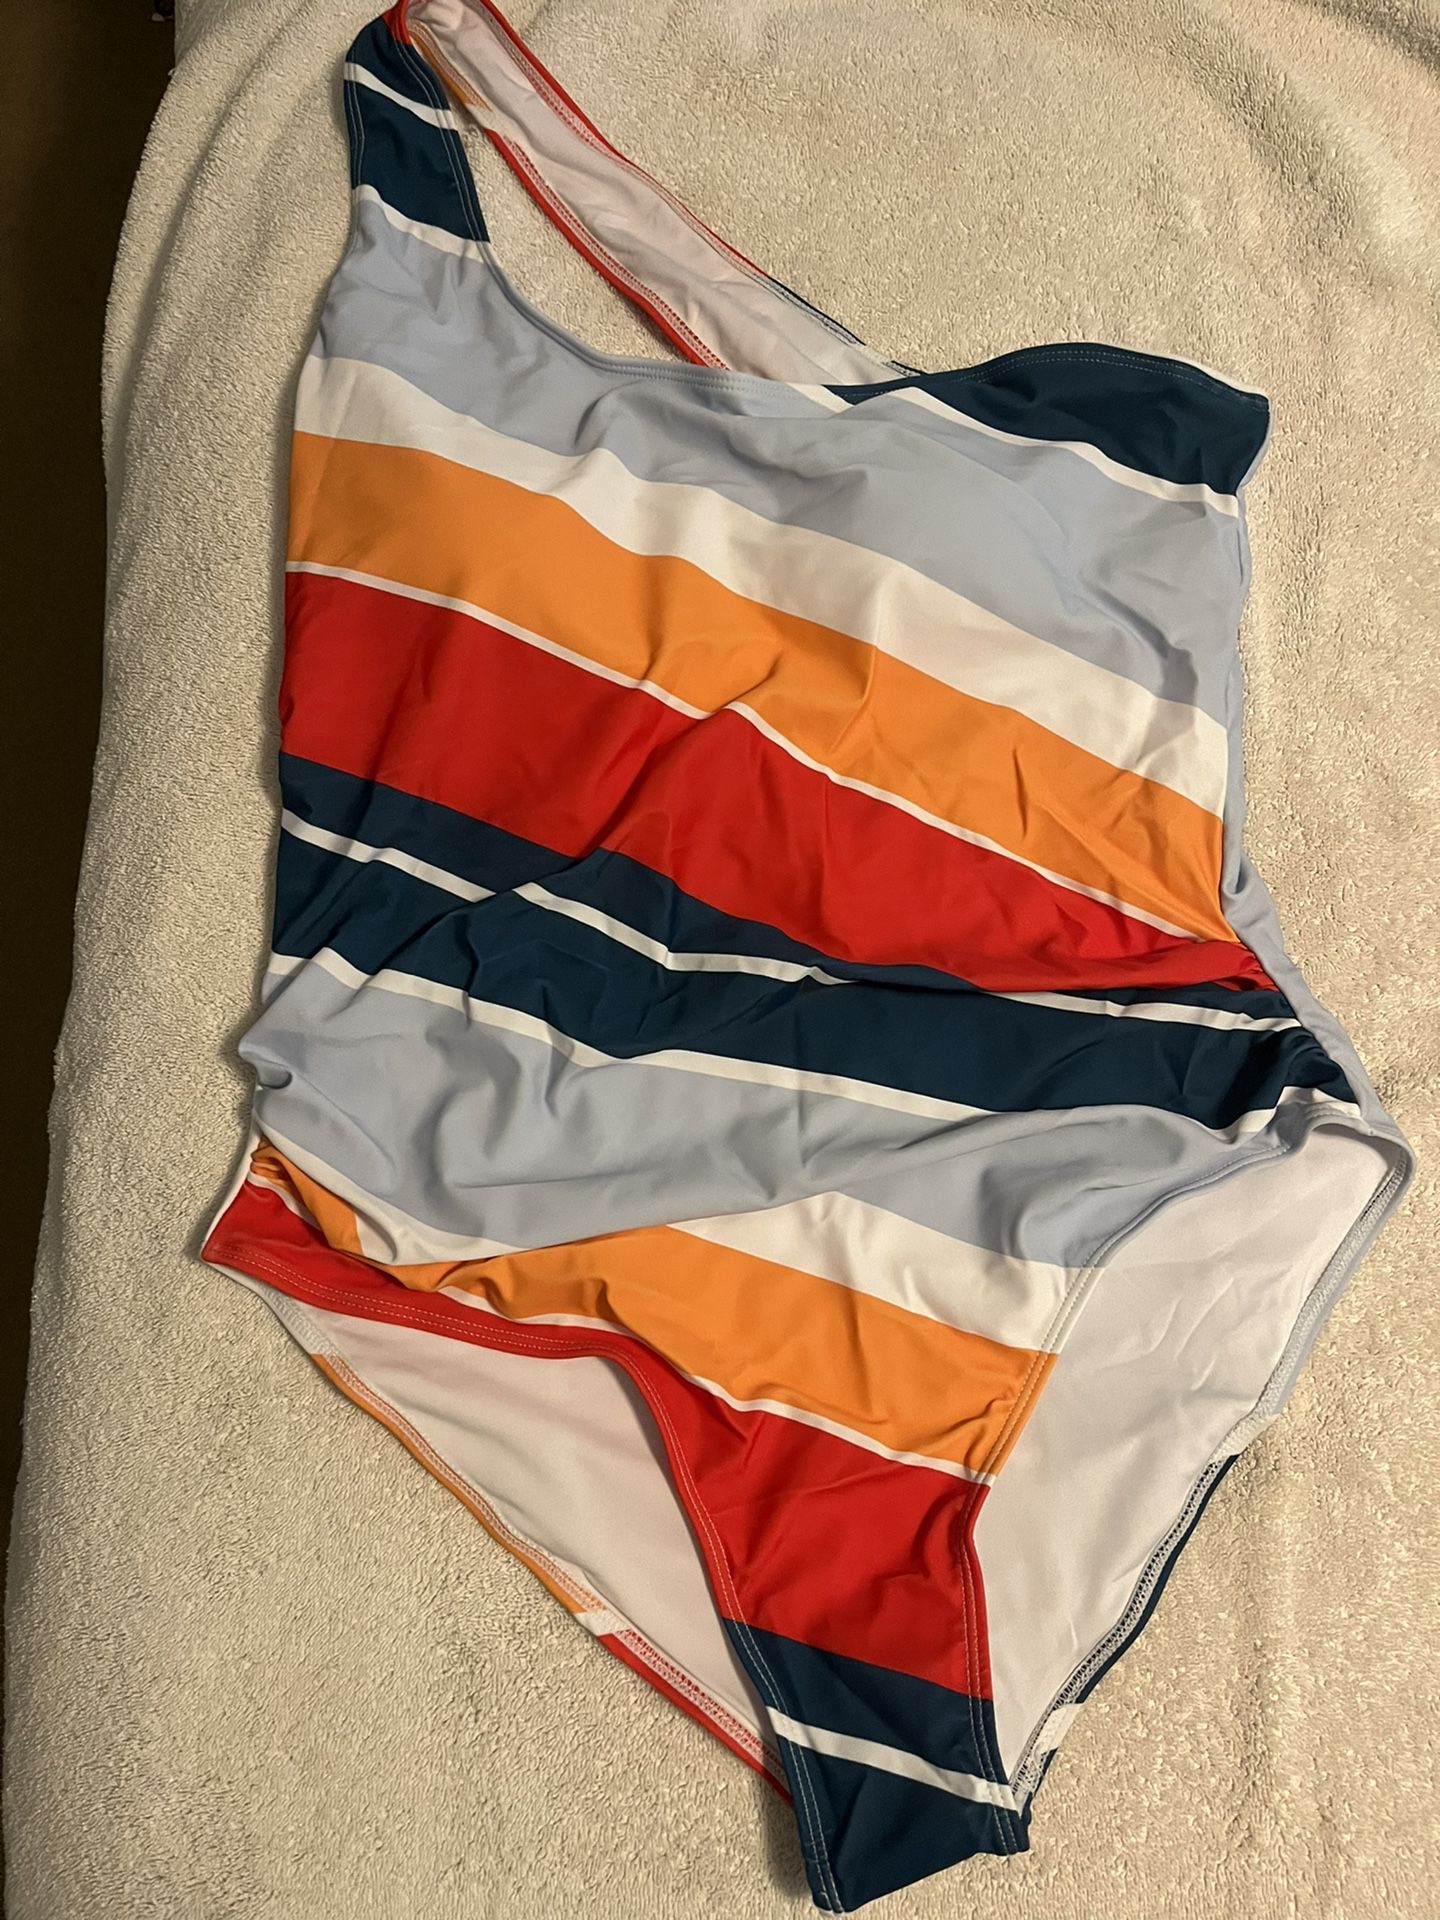 5 Brand new, Never Worn Size XL Bathing Suits (lot)